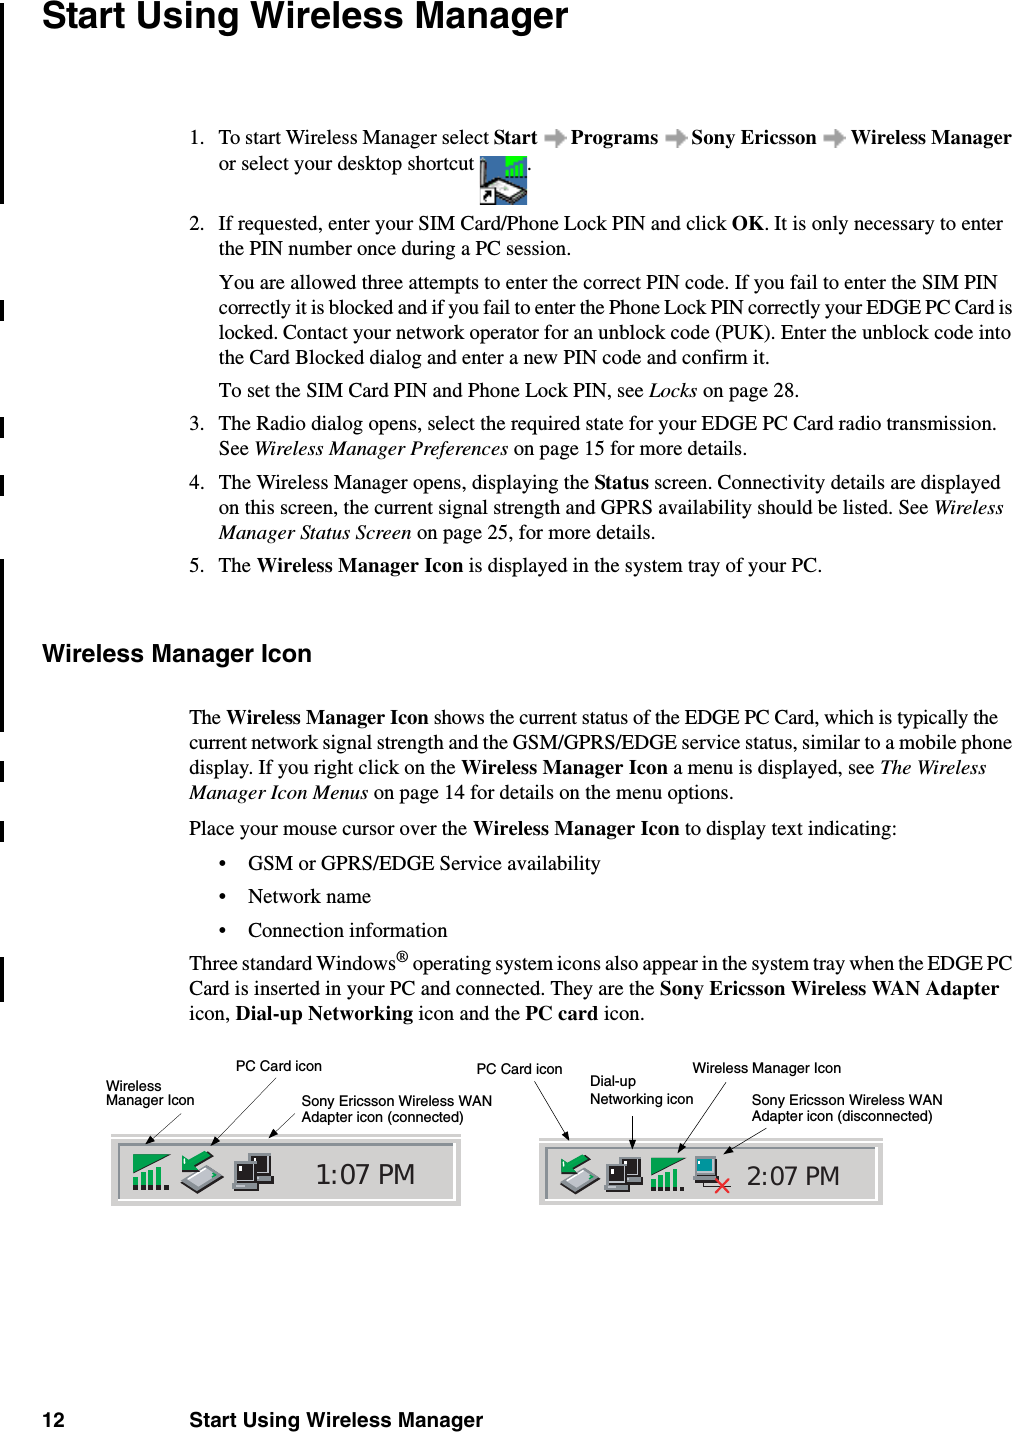 12 Start Using Wireless ManagerStart Using Wireless Manager1. To start Wireless Manager select Start  Programs  Sony Ericsson  Wireless Manager or select your desktop shortcut  .2. If requested, enter your SIM Card/Phone Lock PIN and click OK. It is only necessary to enter the PIN number once during a PC session.You are allowed three attempts to enter the correct PIN code. If you fail to enter the SIM PIN correctly it is blocked and if you fail to enter the Phone Lock PIN correctly your EDGE PC Card is locked. Contact your network operator for an unblock code (PUK). Enter the unblock code into the Card Blocked dialog and enter a new PIN code and confirm it. To set the SIM Card PIN and Phone Lock PIN, see Locks on page 28.3. The Radio dialog opens, select the required state for your EDGE PC Card radio transmission. See Wireless Manager Preferences on page 15 for more details.4. The Wireless Manager opens, displaying the Status screen. Connectivity details are displayed on this screen, the current signal strength and GPRS availability should be listed. See Wireless Manager Status Screen on page 25, for more details.5. The Wireless Manager Icon is displayed in the system tray of your PC.Wireless Manager IconThe Wireless Manager Icon shows the current status of the EDGE PC Card, which is typically the current network signal strength and the GSM/GPRS/EDGE service status, similar to a mobile phone display. If you right click on the Wireless Manager Icon a menu is displayed, see The Wireless Manager Icon Menus on page 14 for details on the menu options.Place your mouse cursor over the Wireless Manager Icon to display text indicating:• GSM or GPRS/EDGE Service availability•Network name• Connection informationThree standard Windows® operating system icons also appear in the system tray when the EDGE PC Card is inserted in your PC and connected. They are the Sony Ericsson Wireless WAN Adapter icon, Dial-up Networking icon and the PC card icon.2:07 PM1:07 PMWirelessPC Card iconSony Ericsson Wireless WAN Wireless Manager IconPC Card iconSony Ericsson Wireless WANDial-up Adapter icon (disconnected)Adapter icon (connected)Networking iconManager Icon